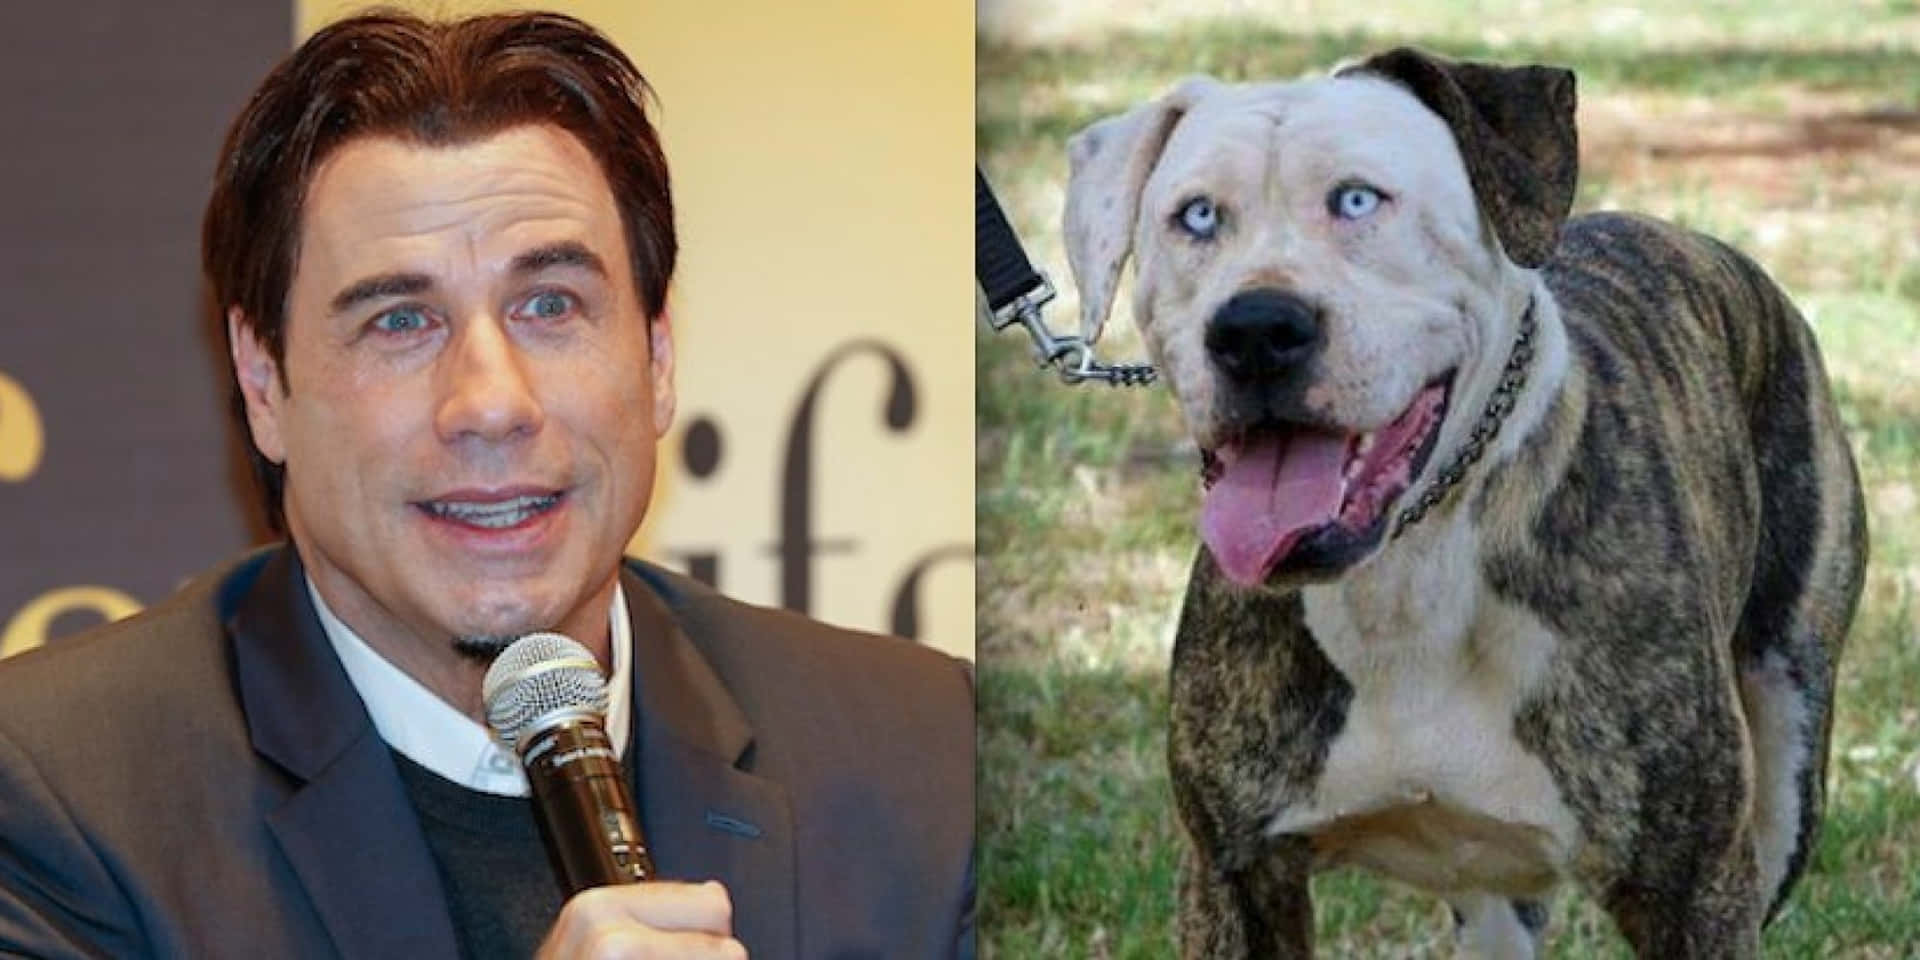 A Man Is Holding A Microphone And A Dog Is Next To Him